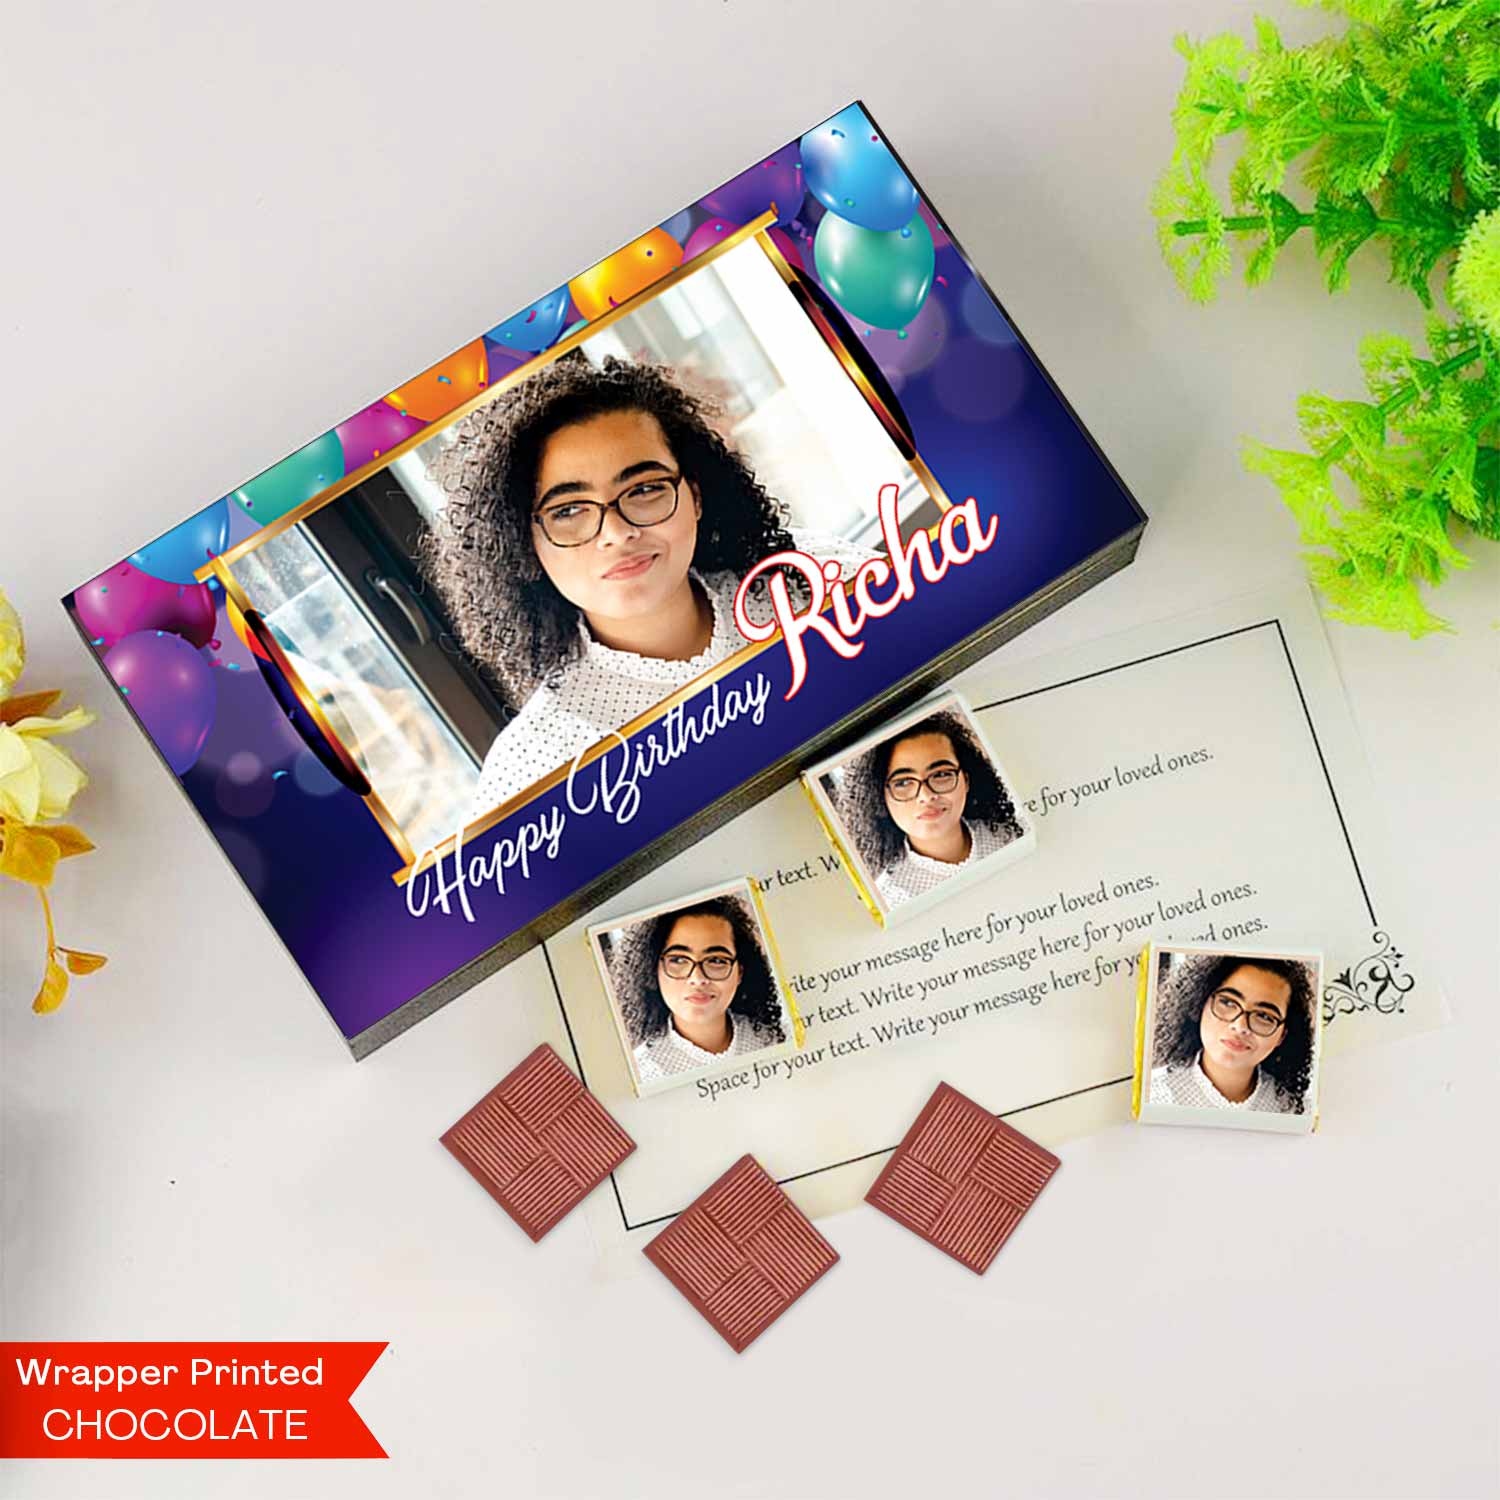  photo printed chocolate printed chocolate boxes personalised chocolate corporate gifts personalized chocolate gifts print on chocolate chocolate wrapper gift box printed cake boxes chocolate wrapping paper